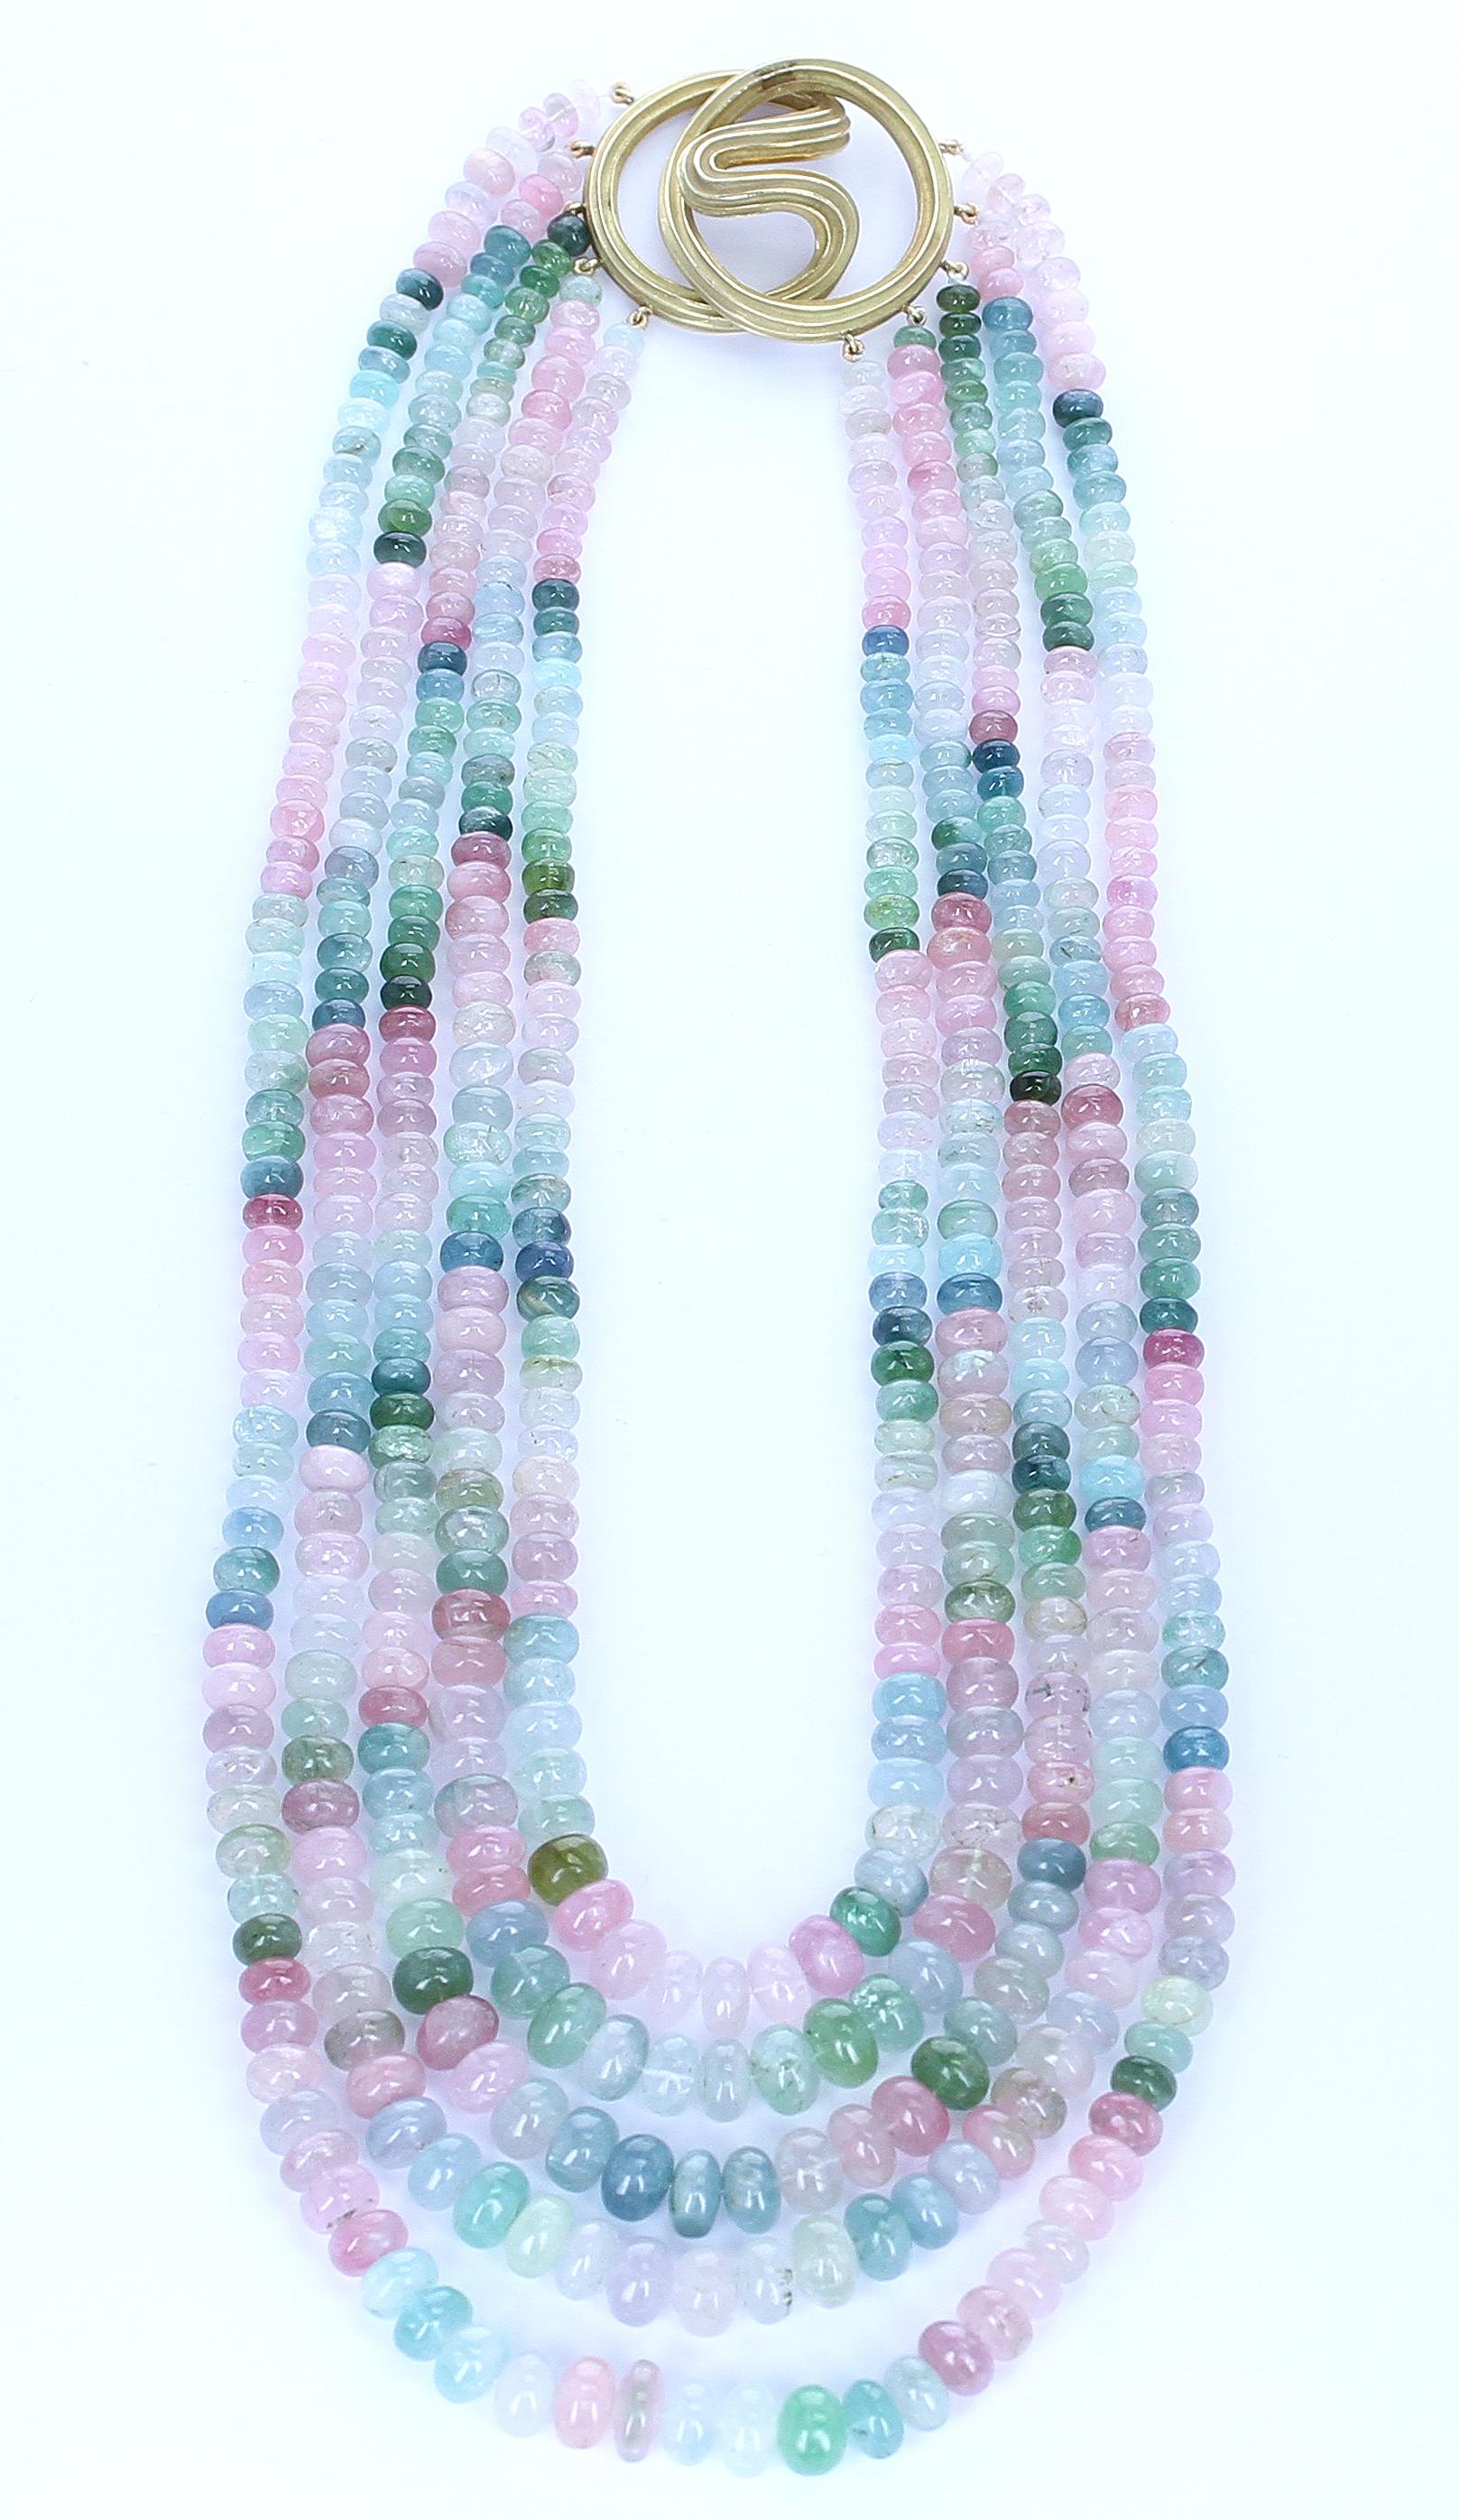 A Natural Plain Multi-Tourmaline Necklace consisting of 5 lines. The beads weigh a total of 1358 carats, the clasp weighs 123 carats, and the total weight of the necklace is 1481 carats. The clasp is in 18 Karat Gold and is by Christopher Walling.